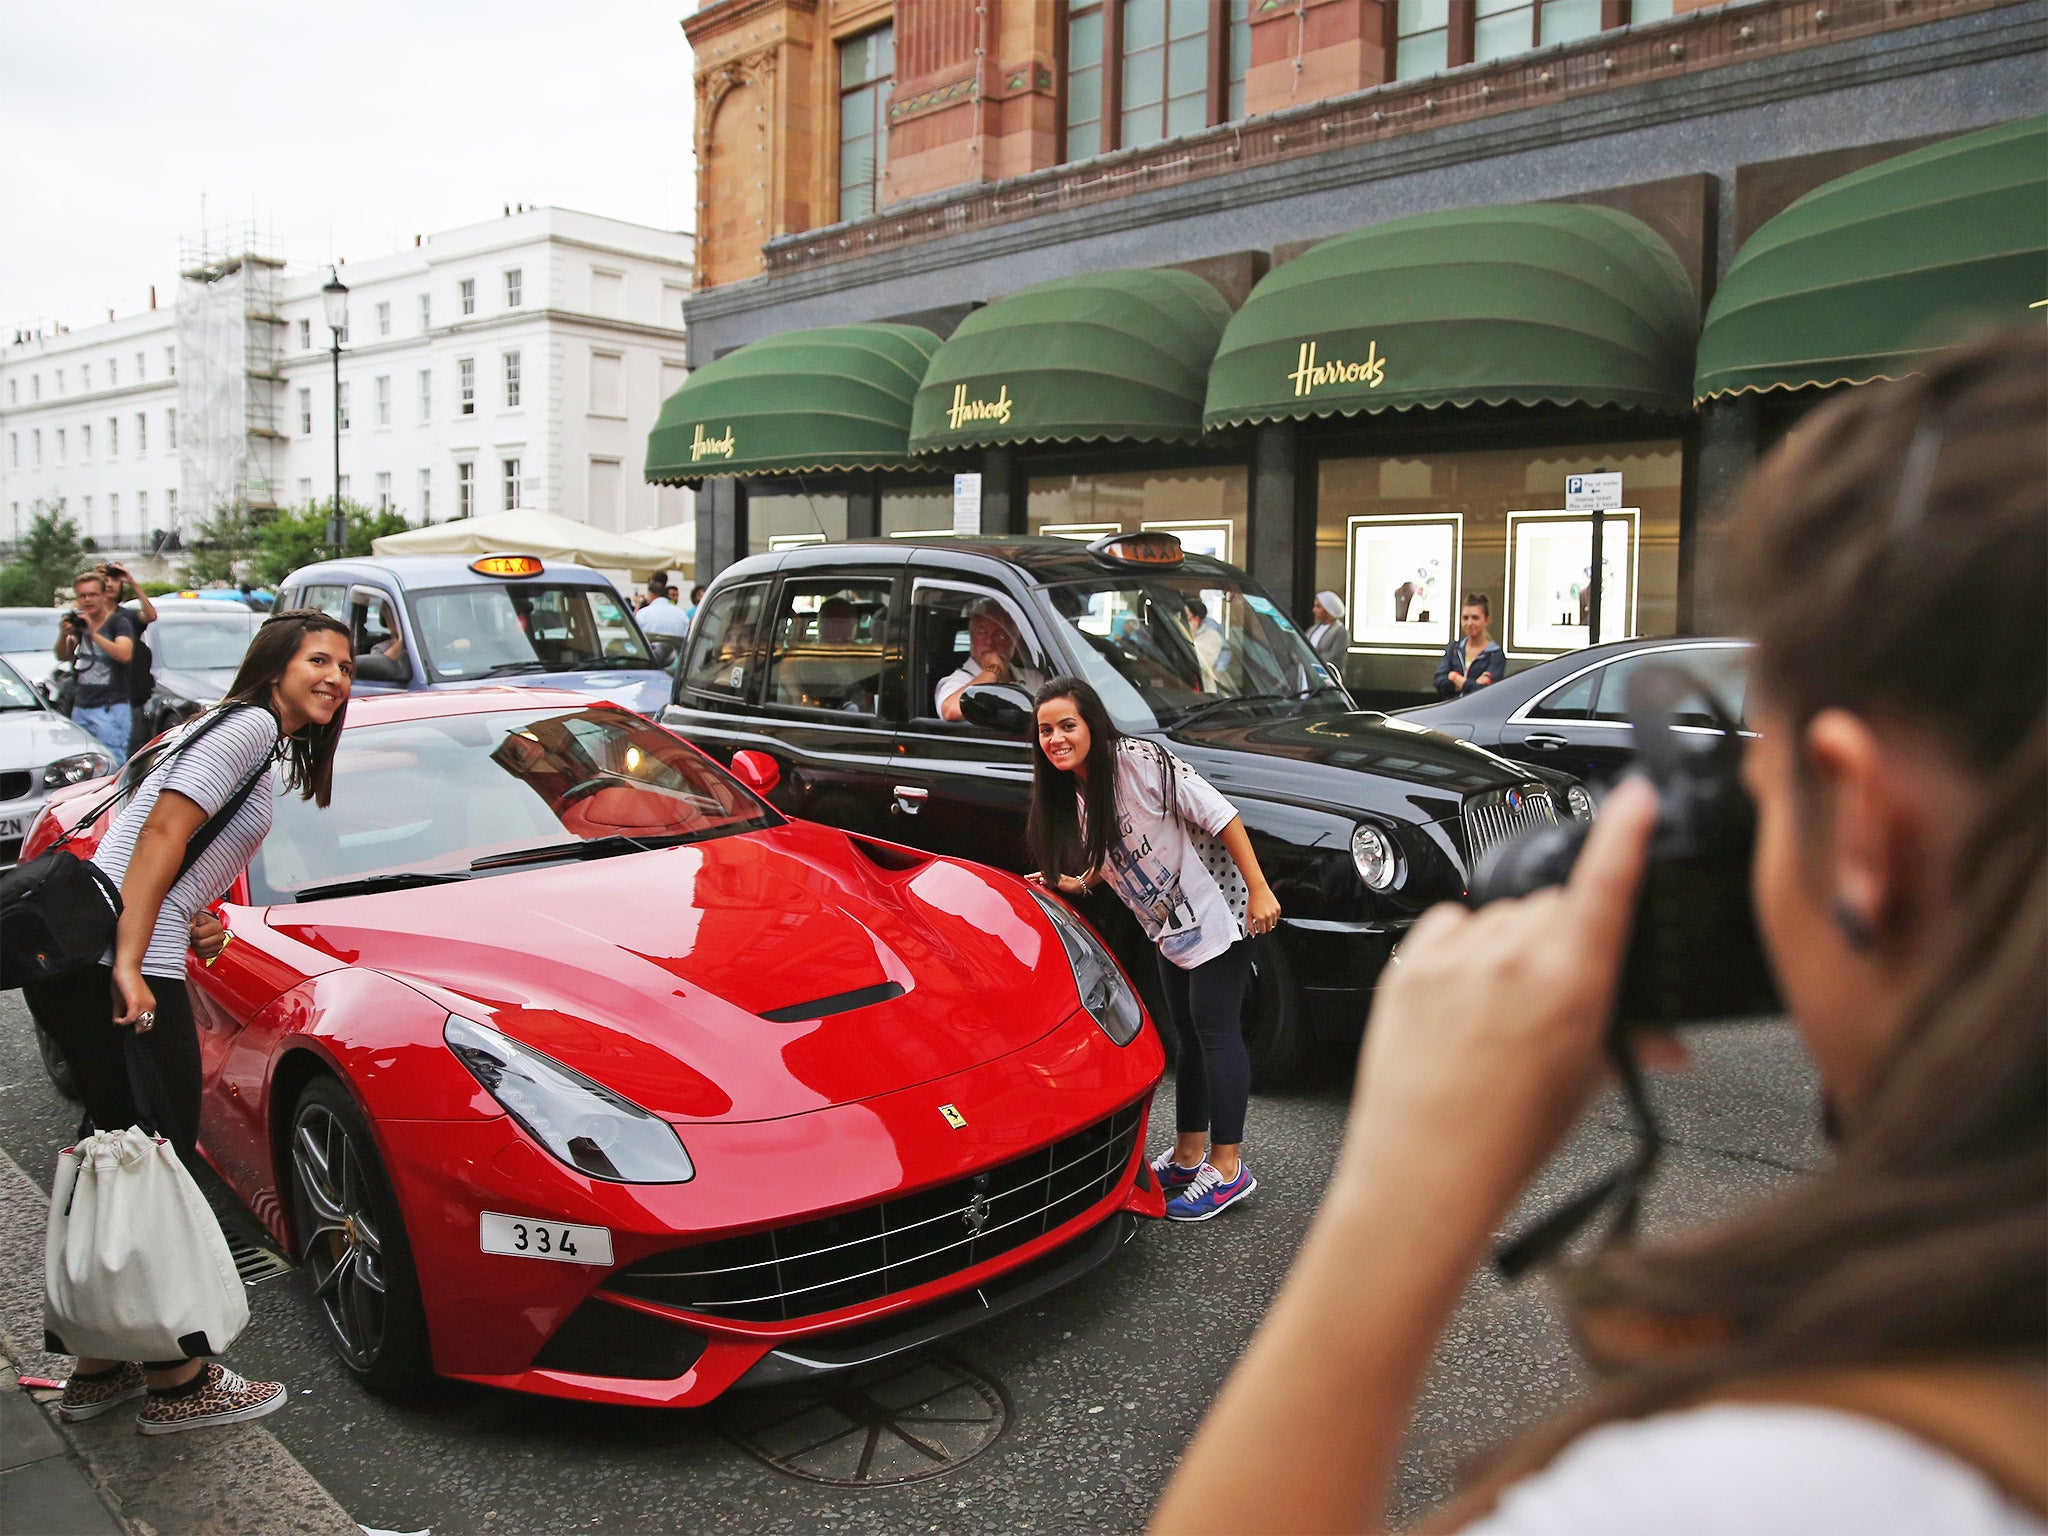 Tourists flock to see foreign supercars in Knightsbridge, but many Britons are less impressed